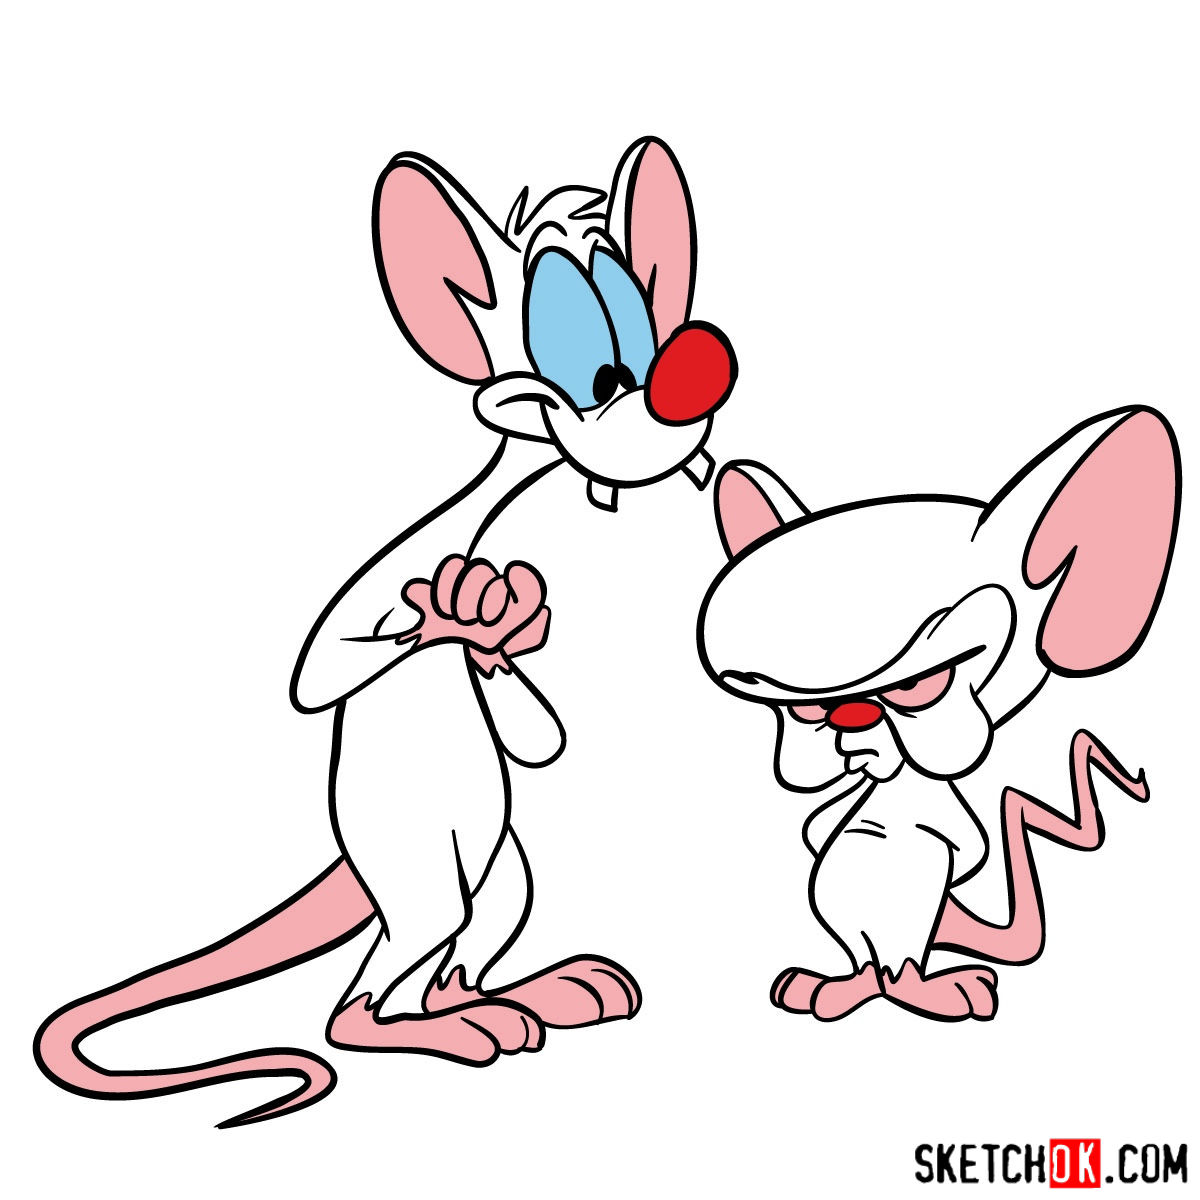 How to draw Pinky and the Brain together